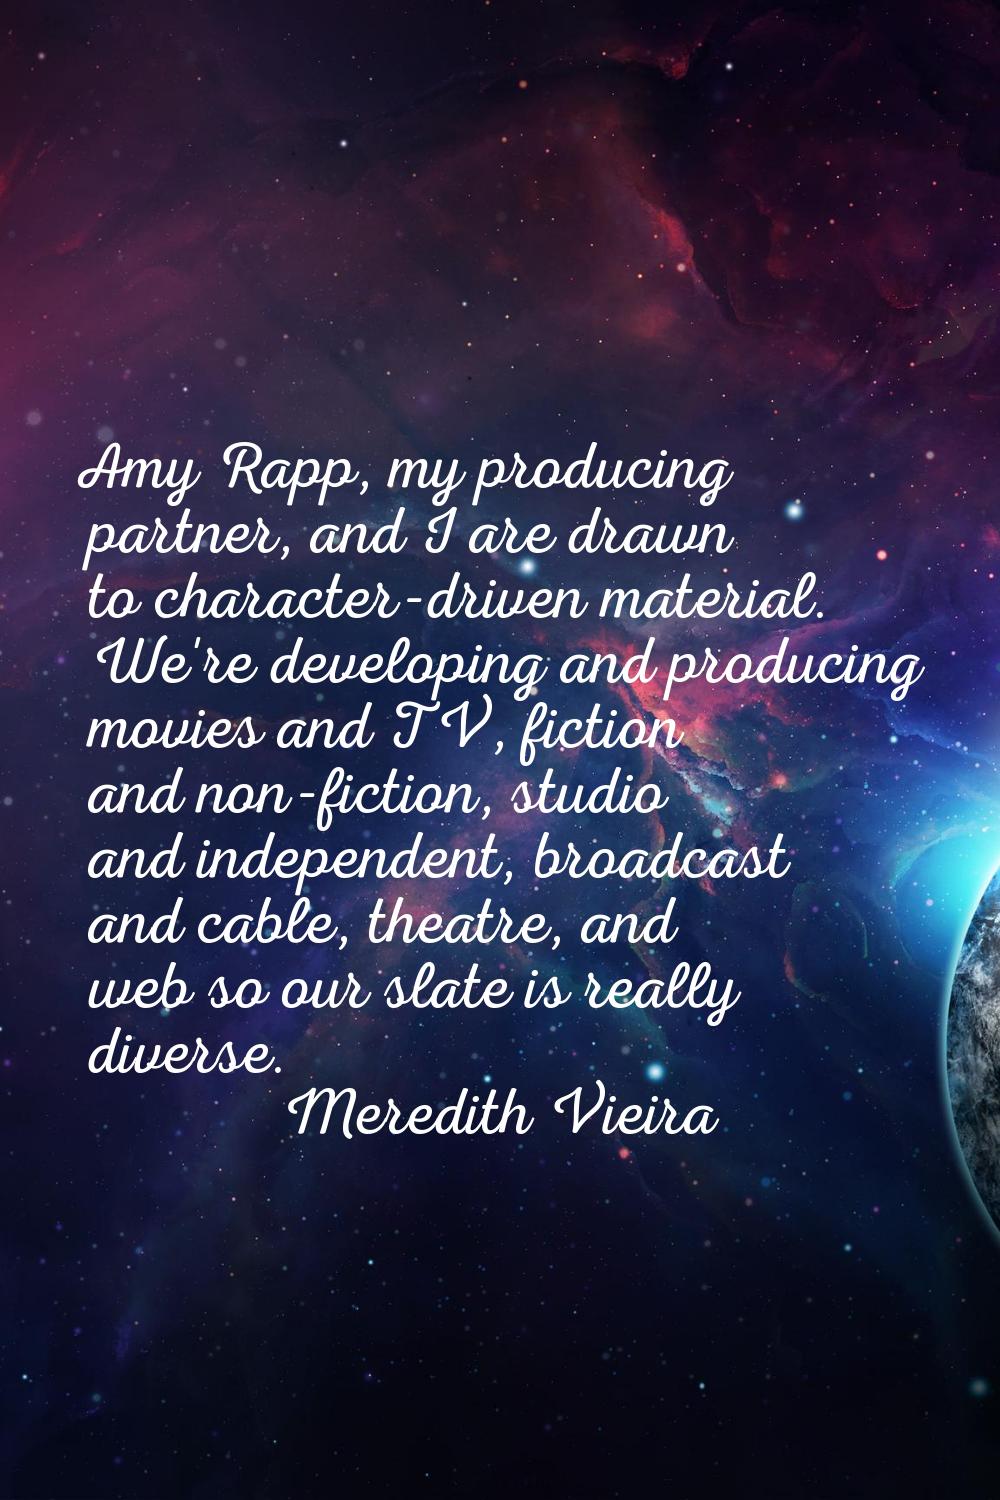 Amy Rapp, my producing partner, and I are drawn to character-driven material. We're developing and 